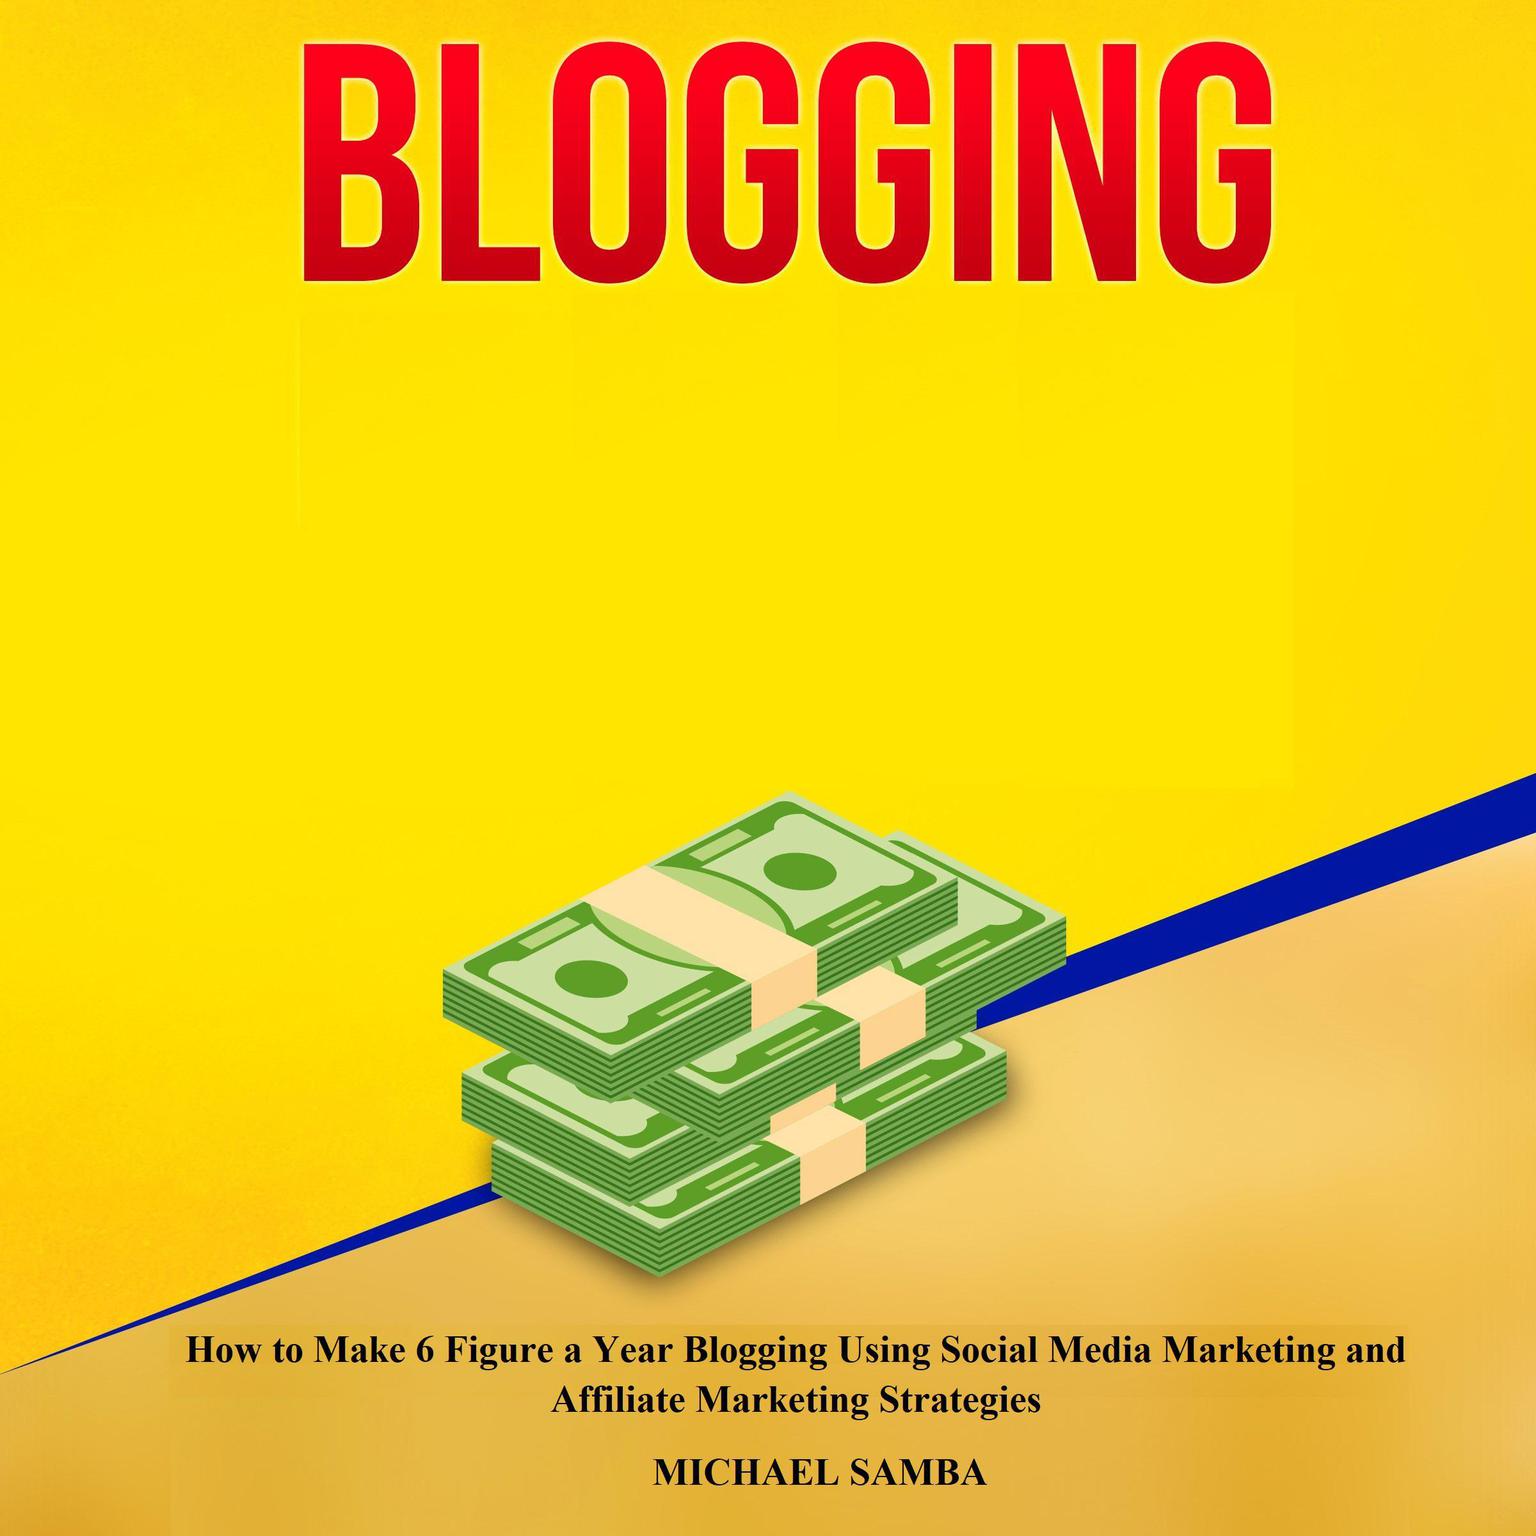 Blogging: How to Make 6 Figure a Year Blogging Using Social Media Marketing and Affiliate Marketing Strategies Audiobook, by Michael Samba